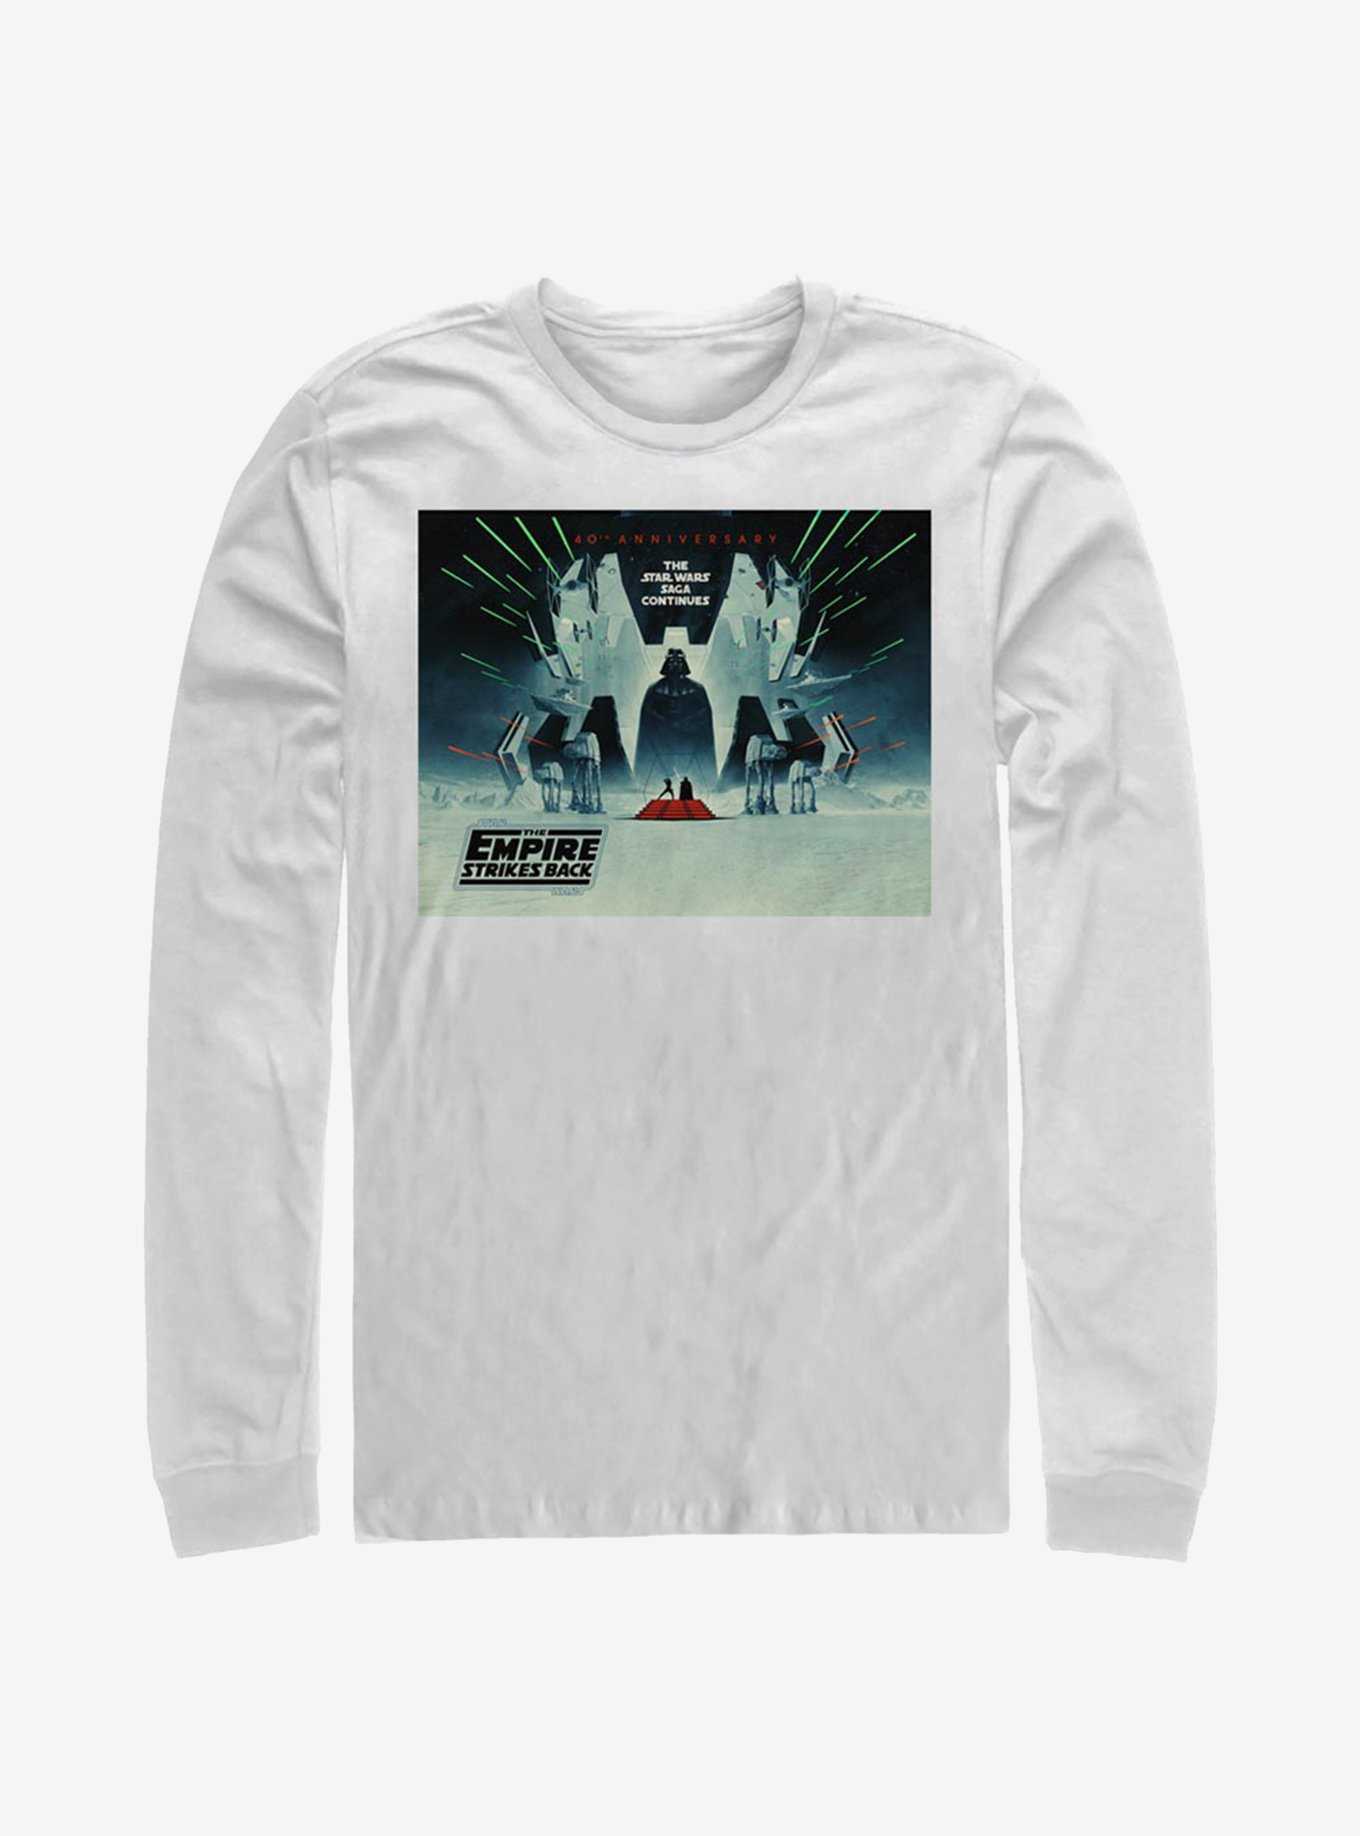 Star Wars The Empire Strikes Back Square Poster Long-Sleeve T-Shirt, , hi-res